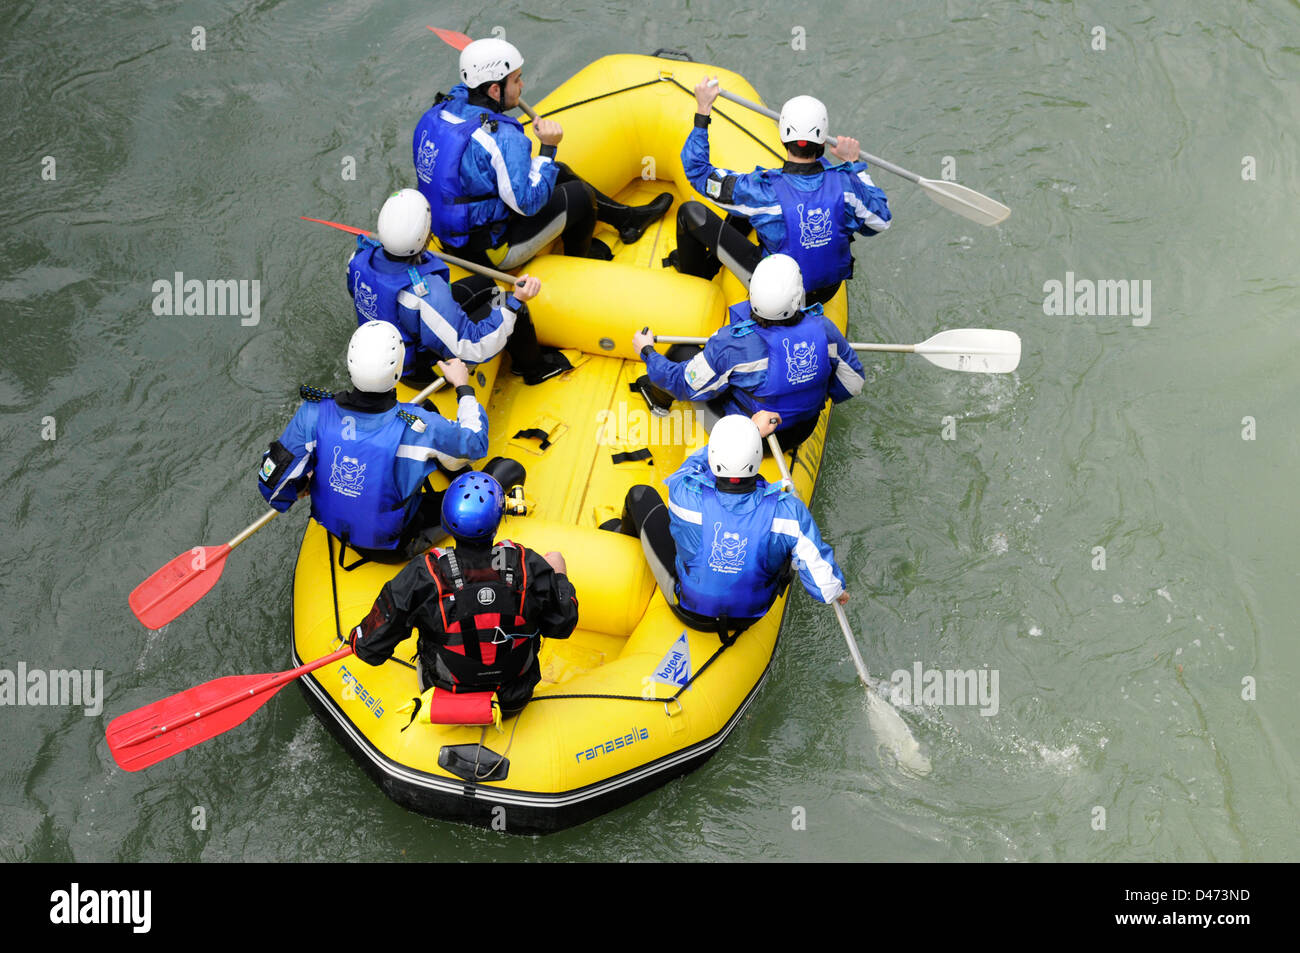 Young tourists practice rafting with a guide in Sella river in an inflatable boat in Asturias, Spain. Stock Photo